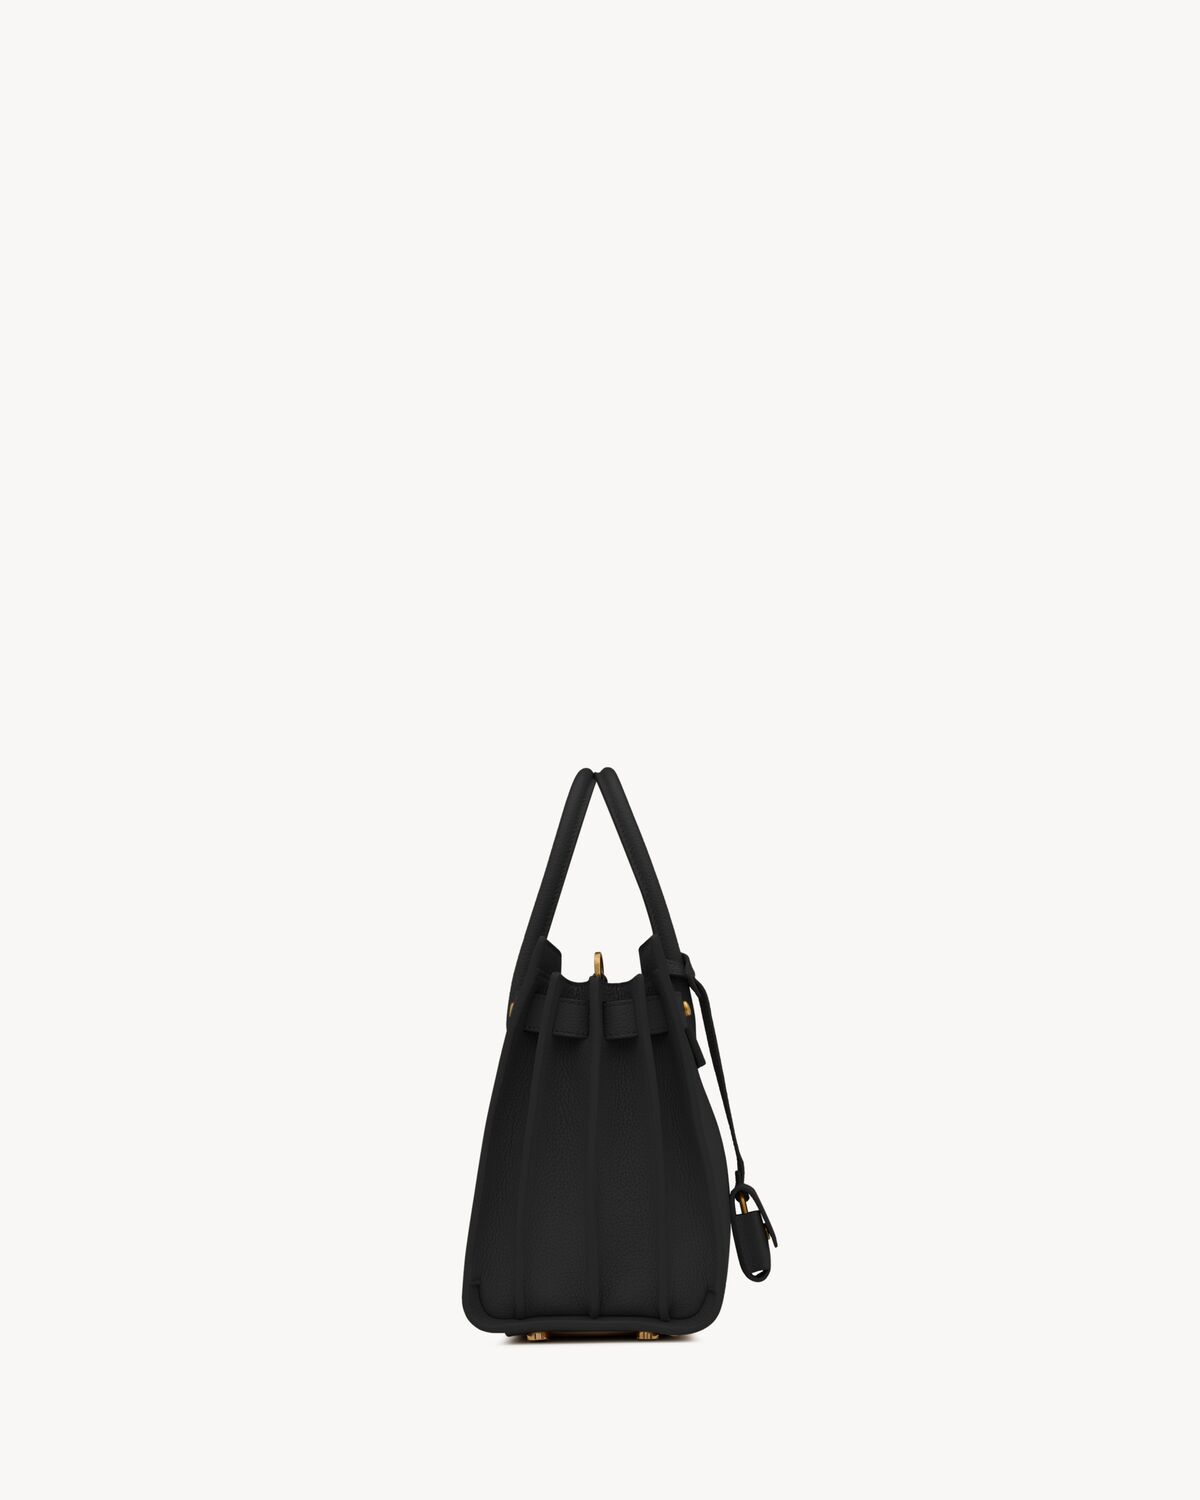 SAC DE JOUR BABY IN SUPPLE GRAINED LEATHER